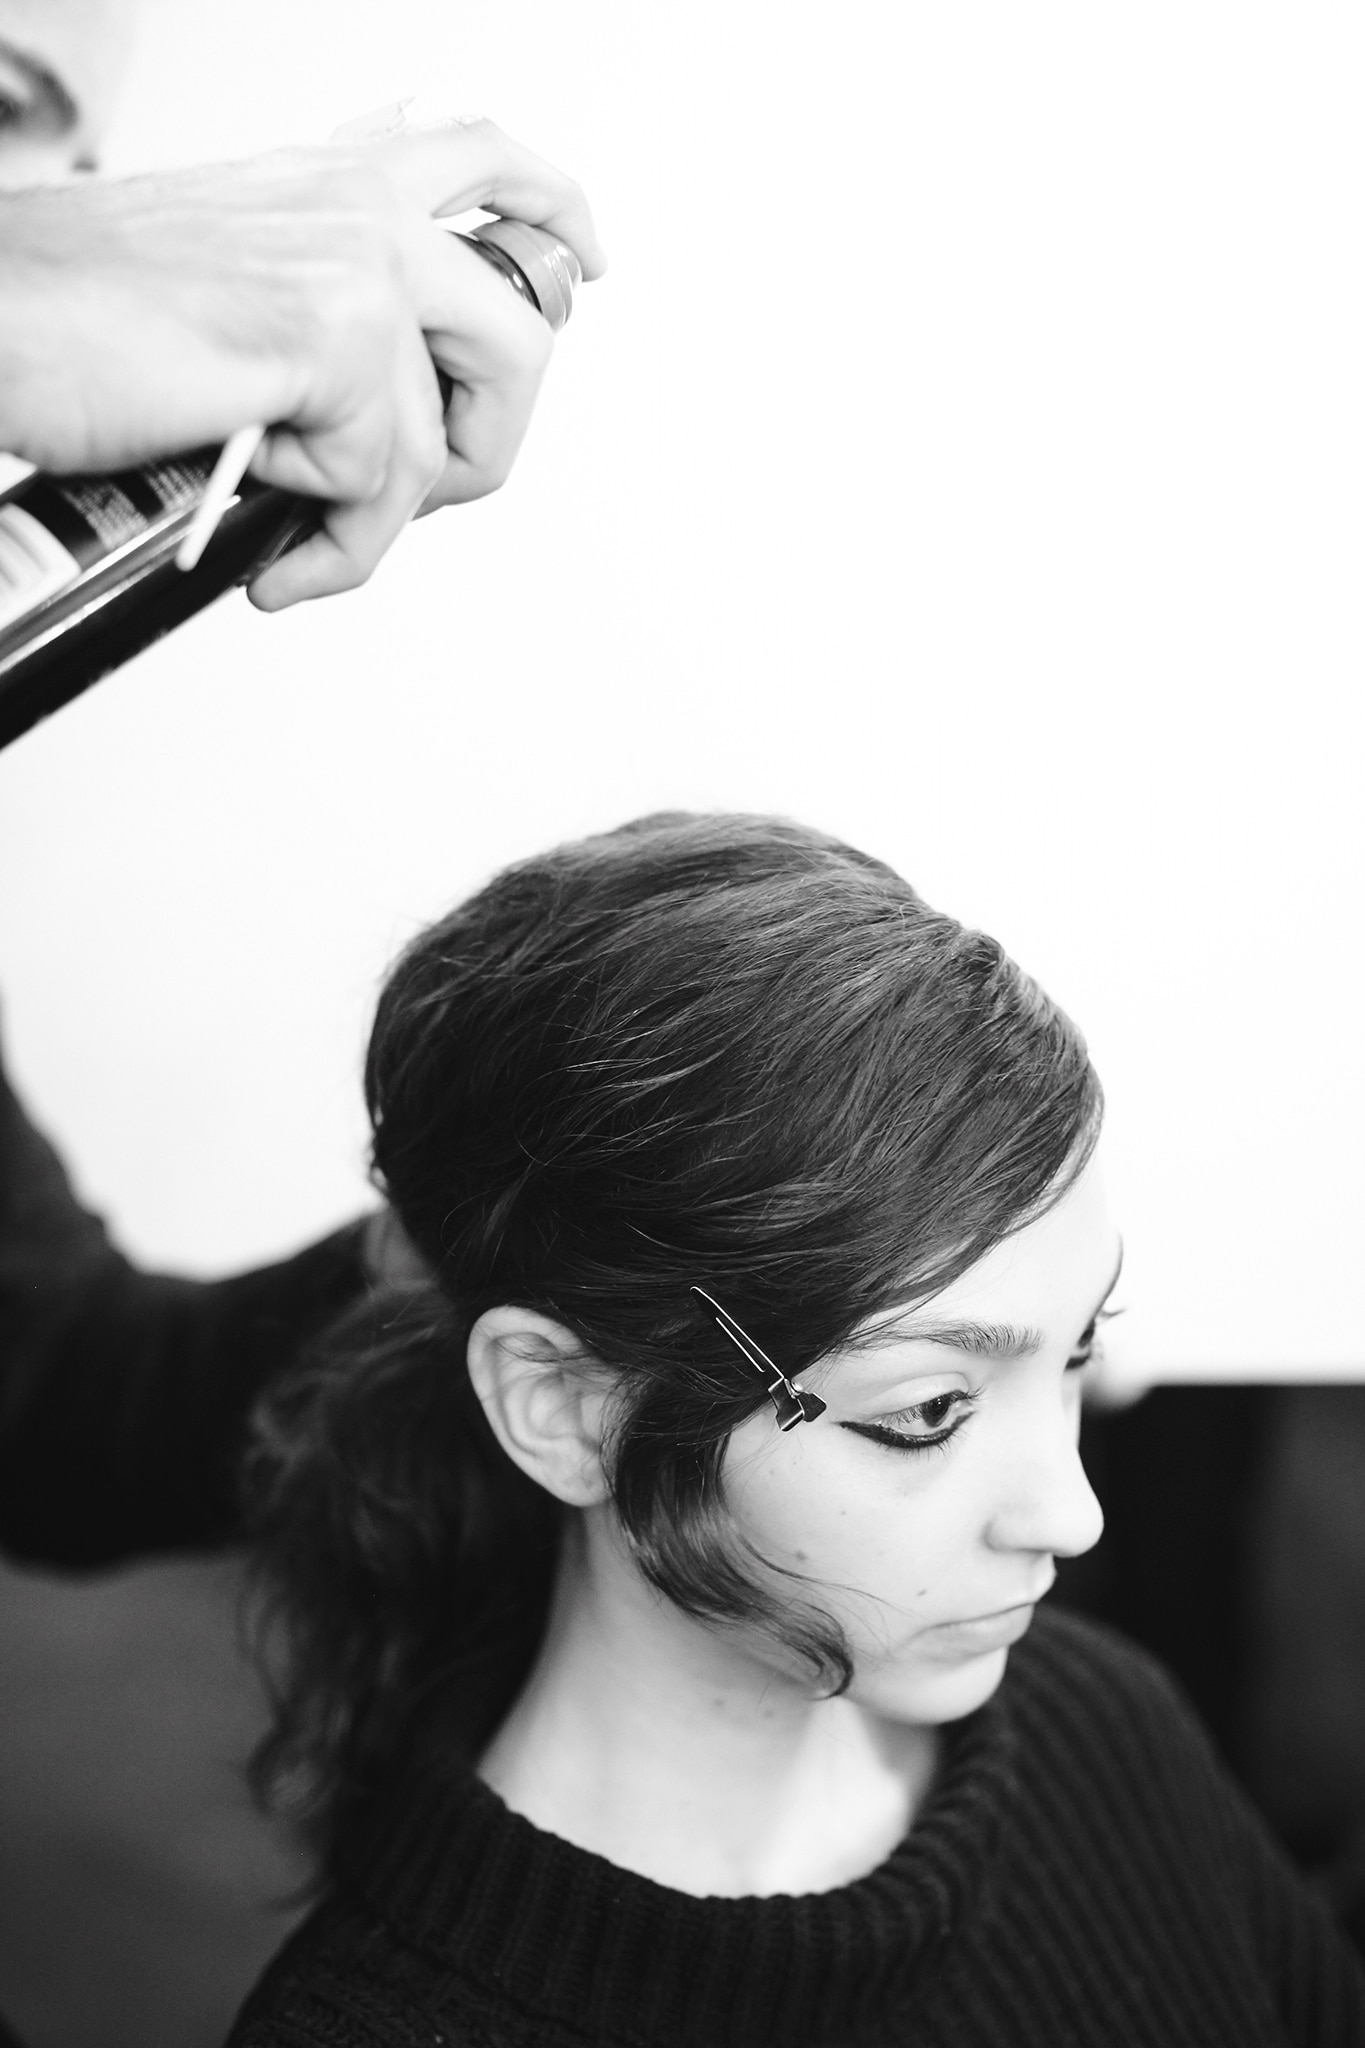 A model with long dark hair and heavy black eye liner, with a stylist applying hairspray to it